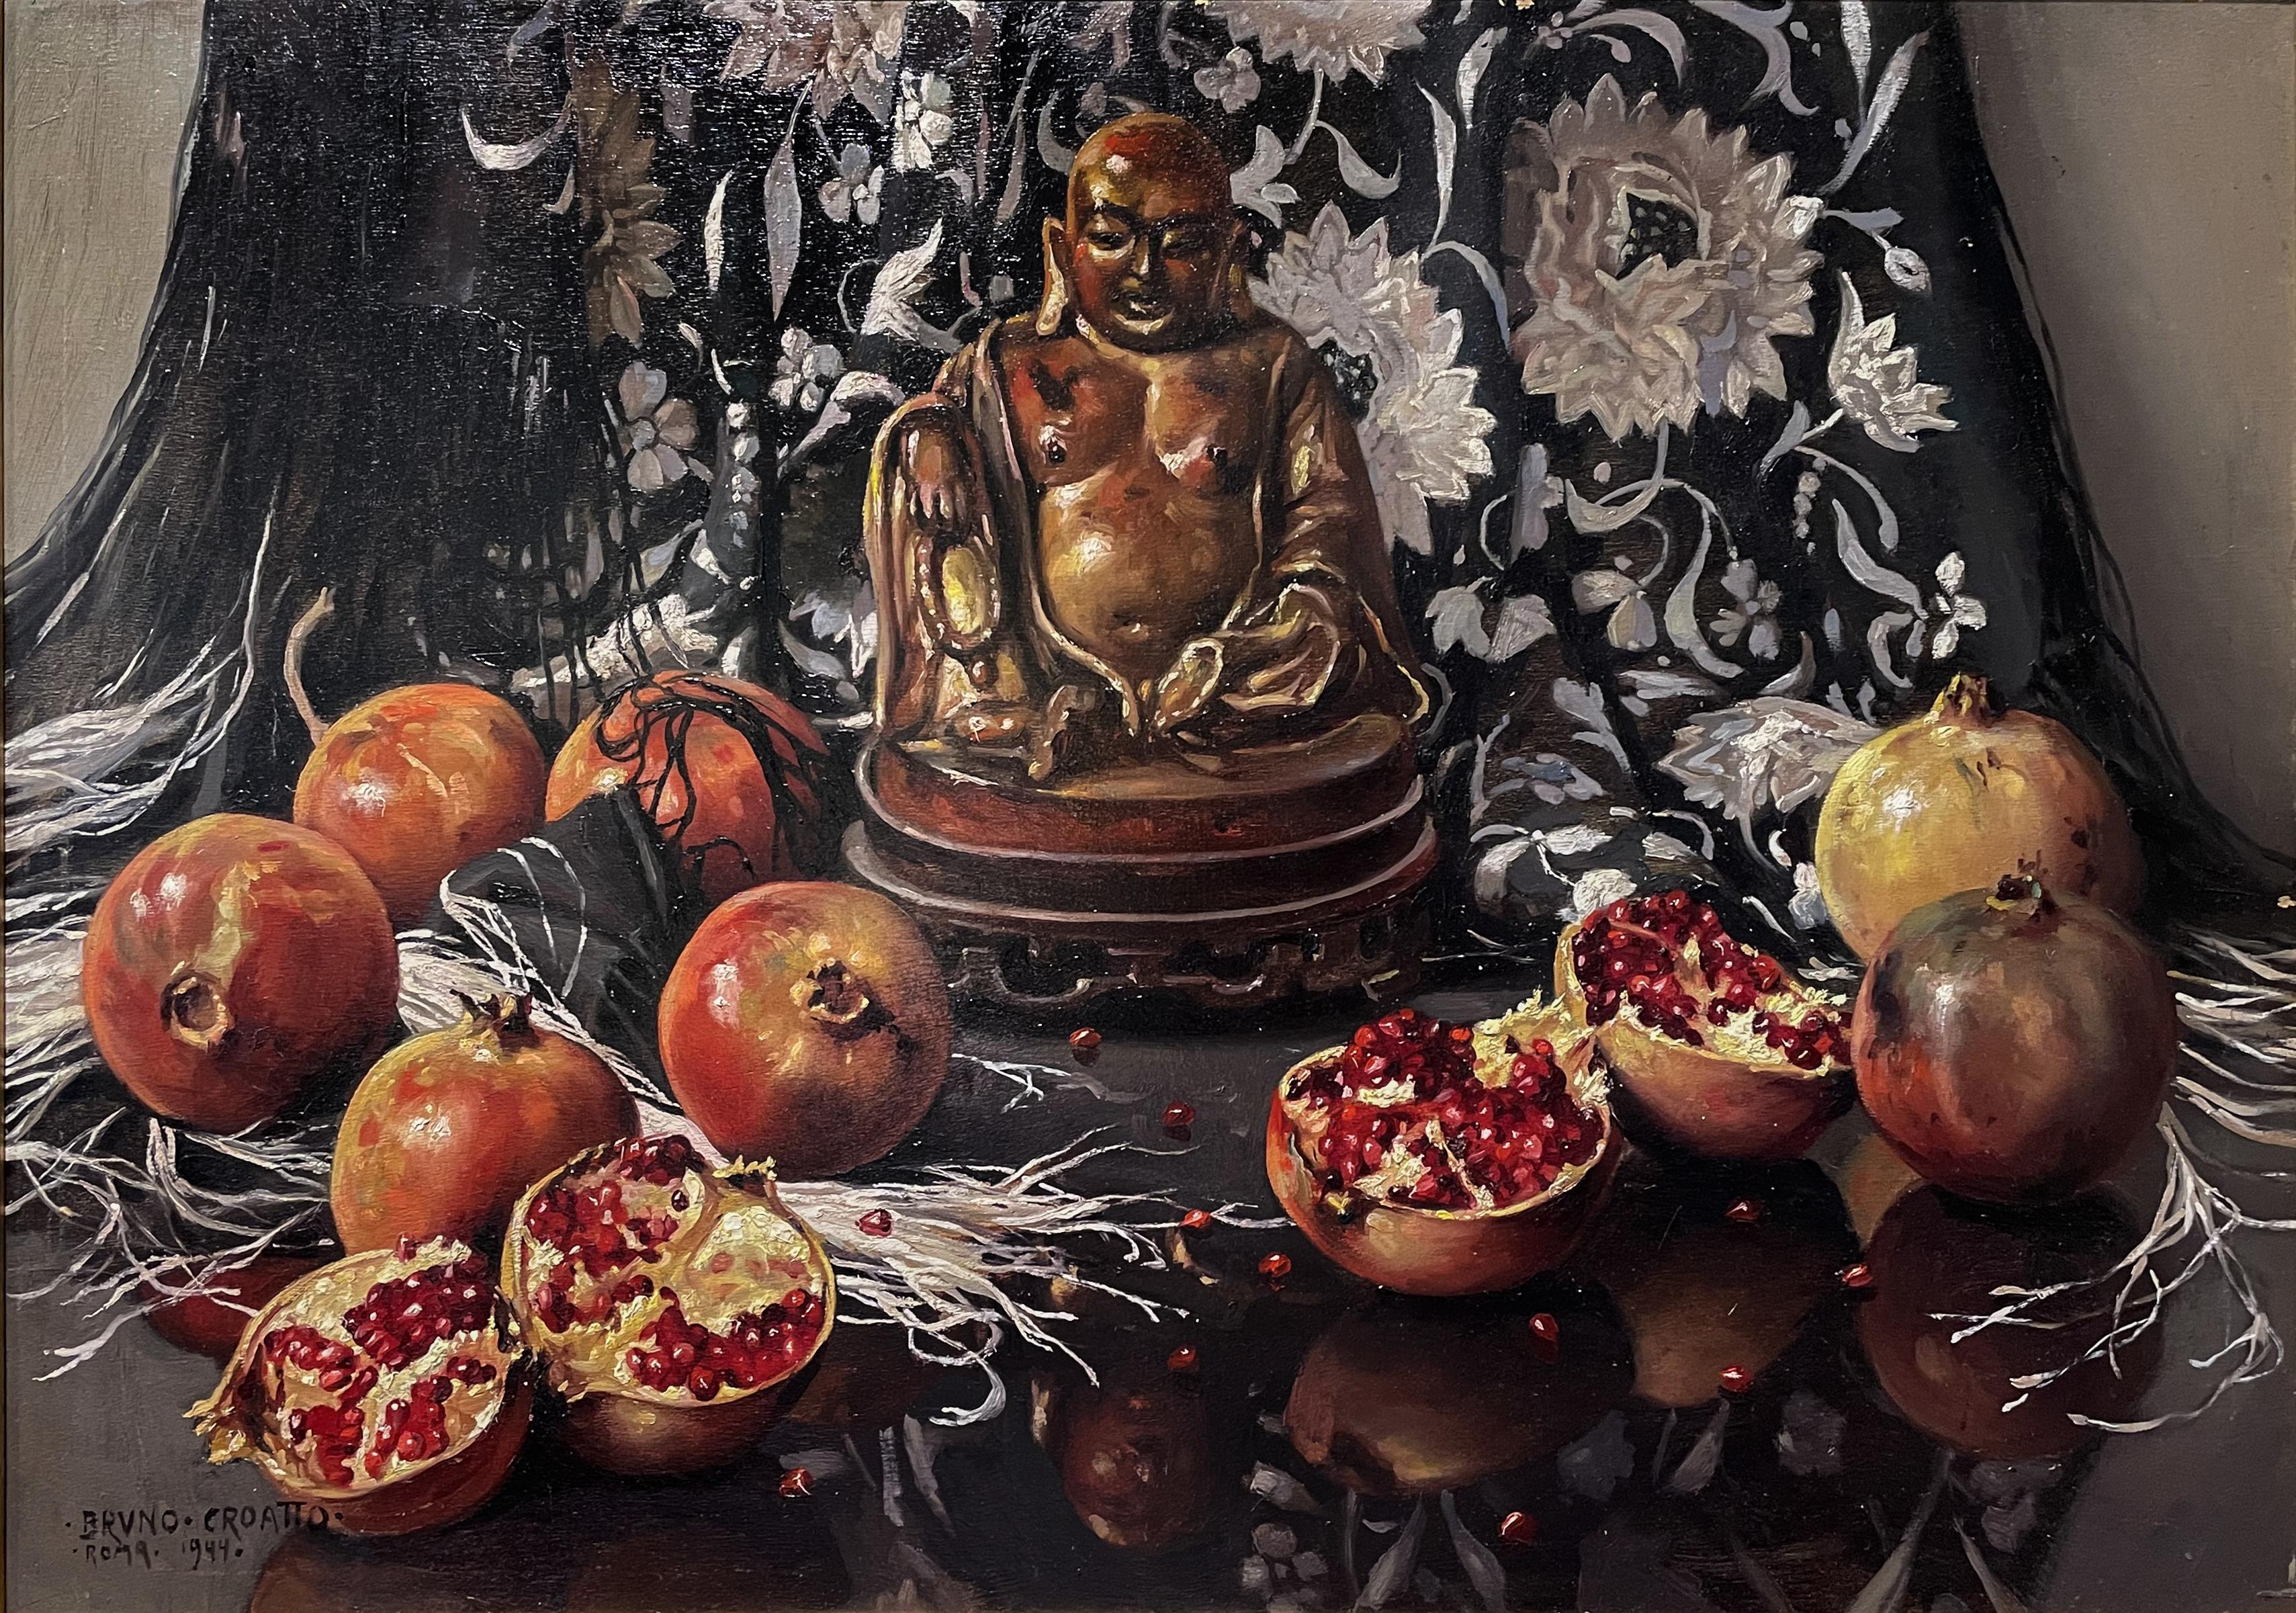 In this work we find the image of the Buddha and several pomegranates, symbolizing fertility.

The choice of combining objects and materials of different nature becomes an unmistakable feature of his style. A taste for the intrinsic qualities of